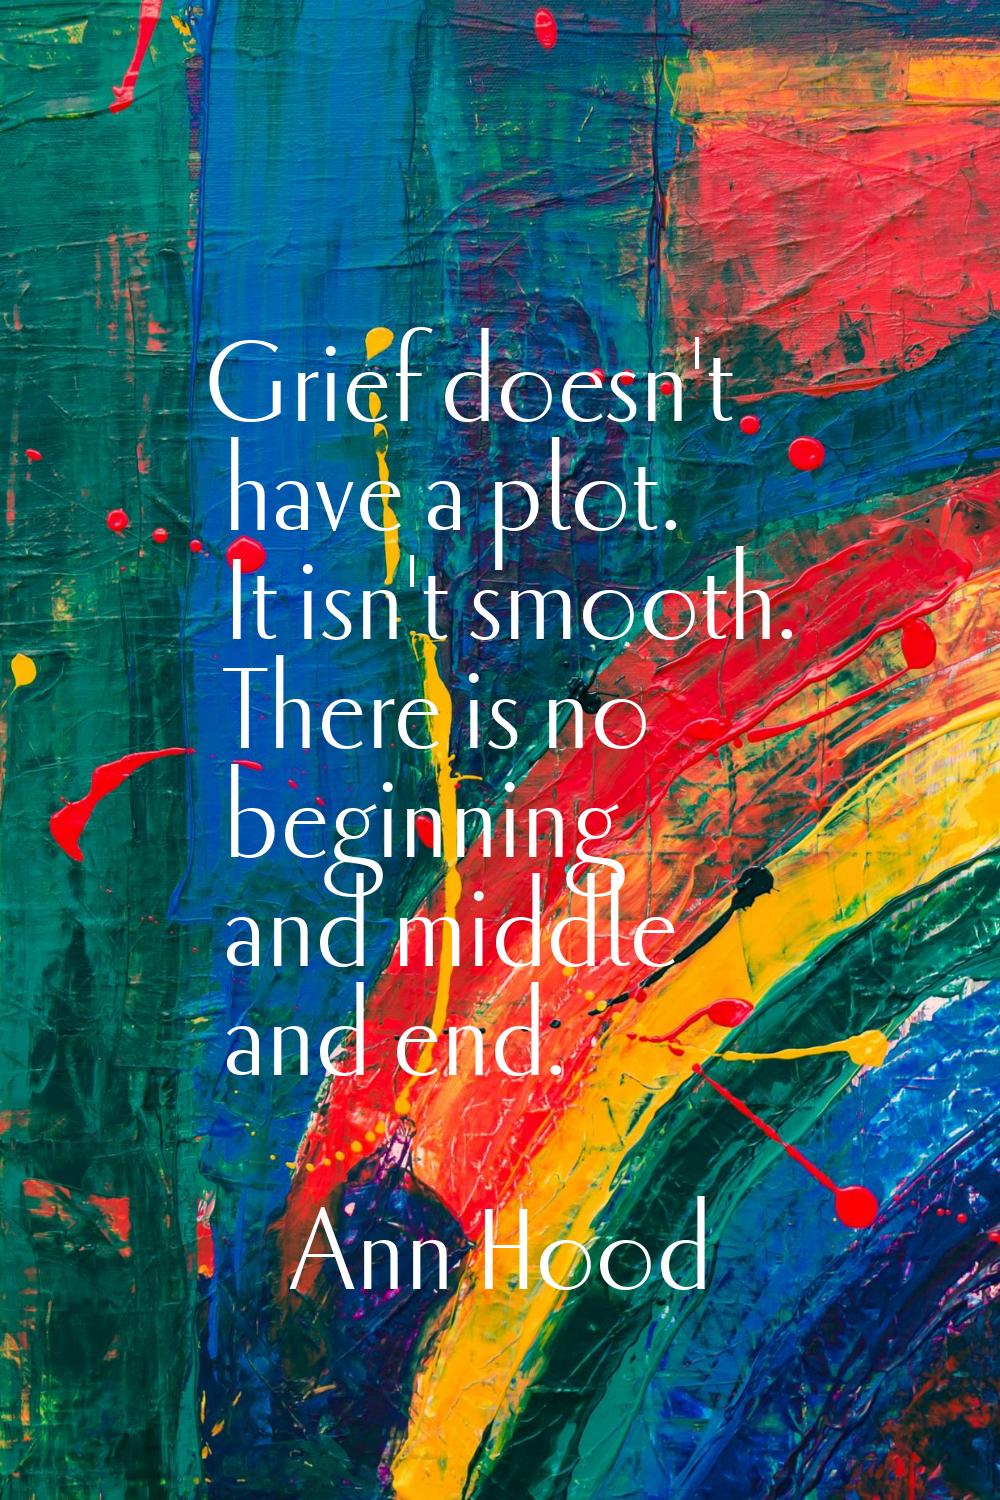 Grief doesn't have a plot. It isn't smooth. There is no beginning and middle and end.